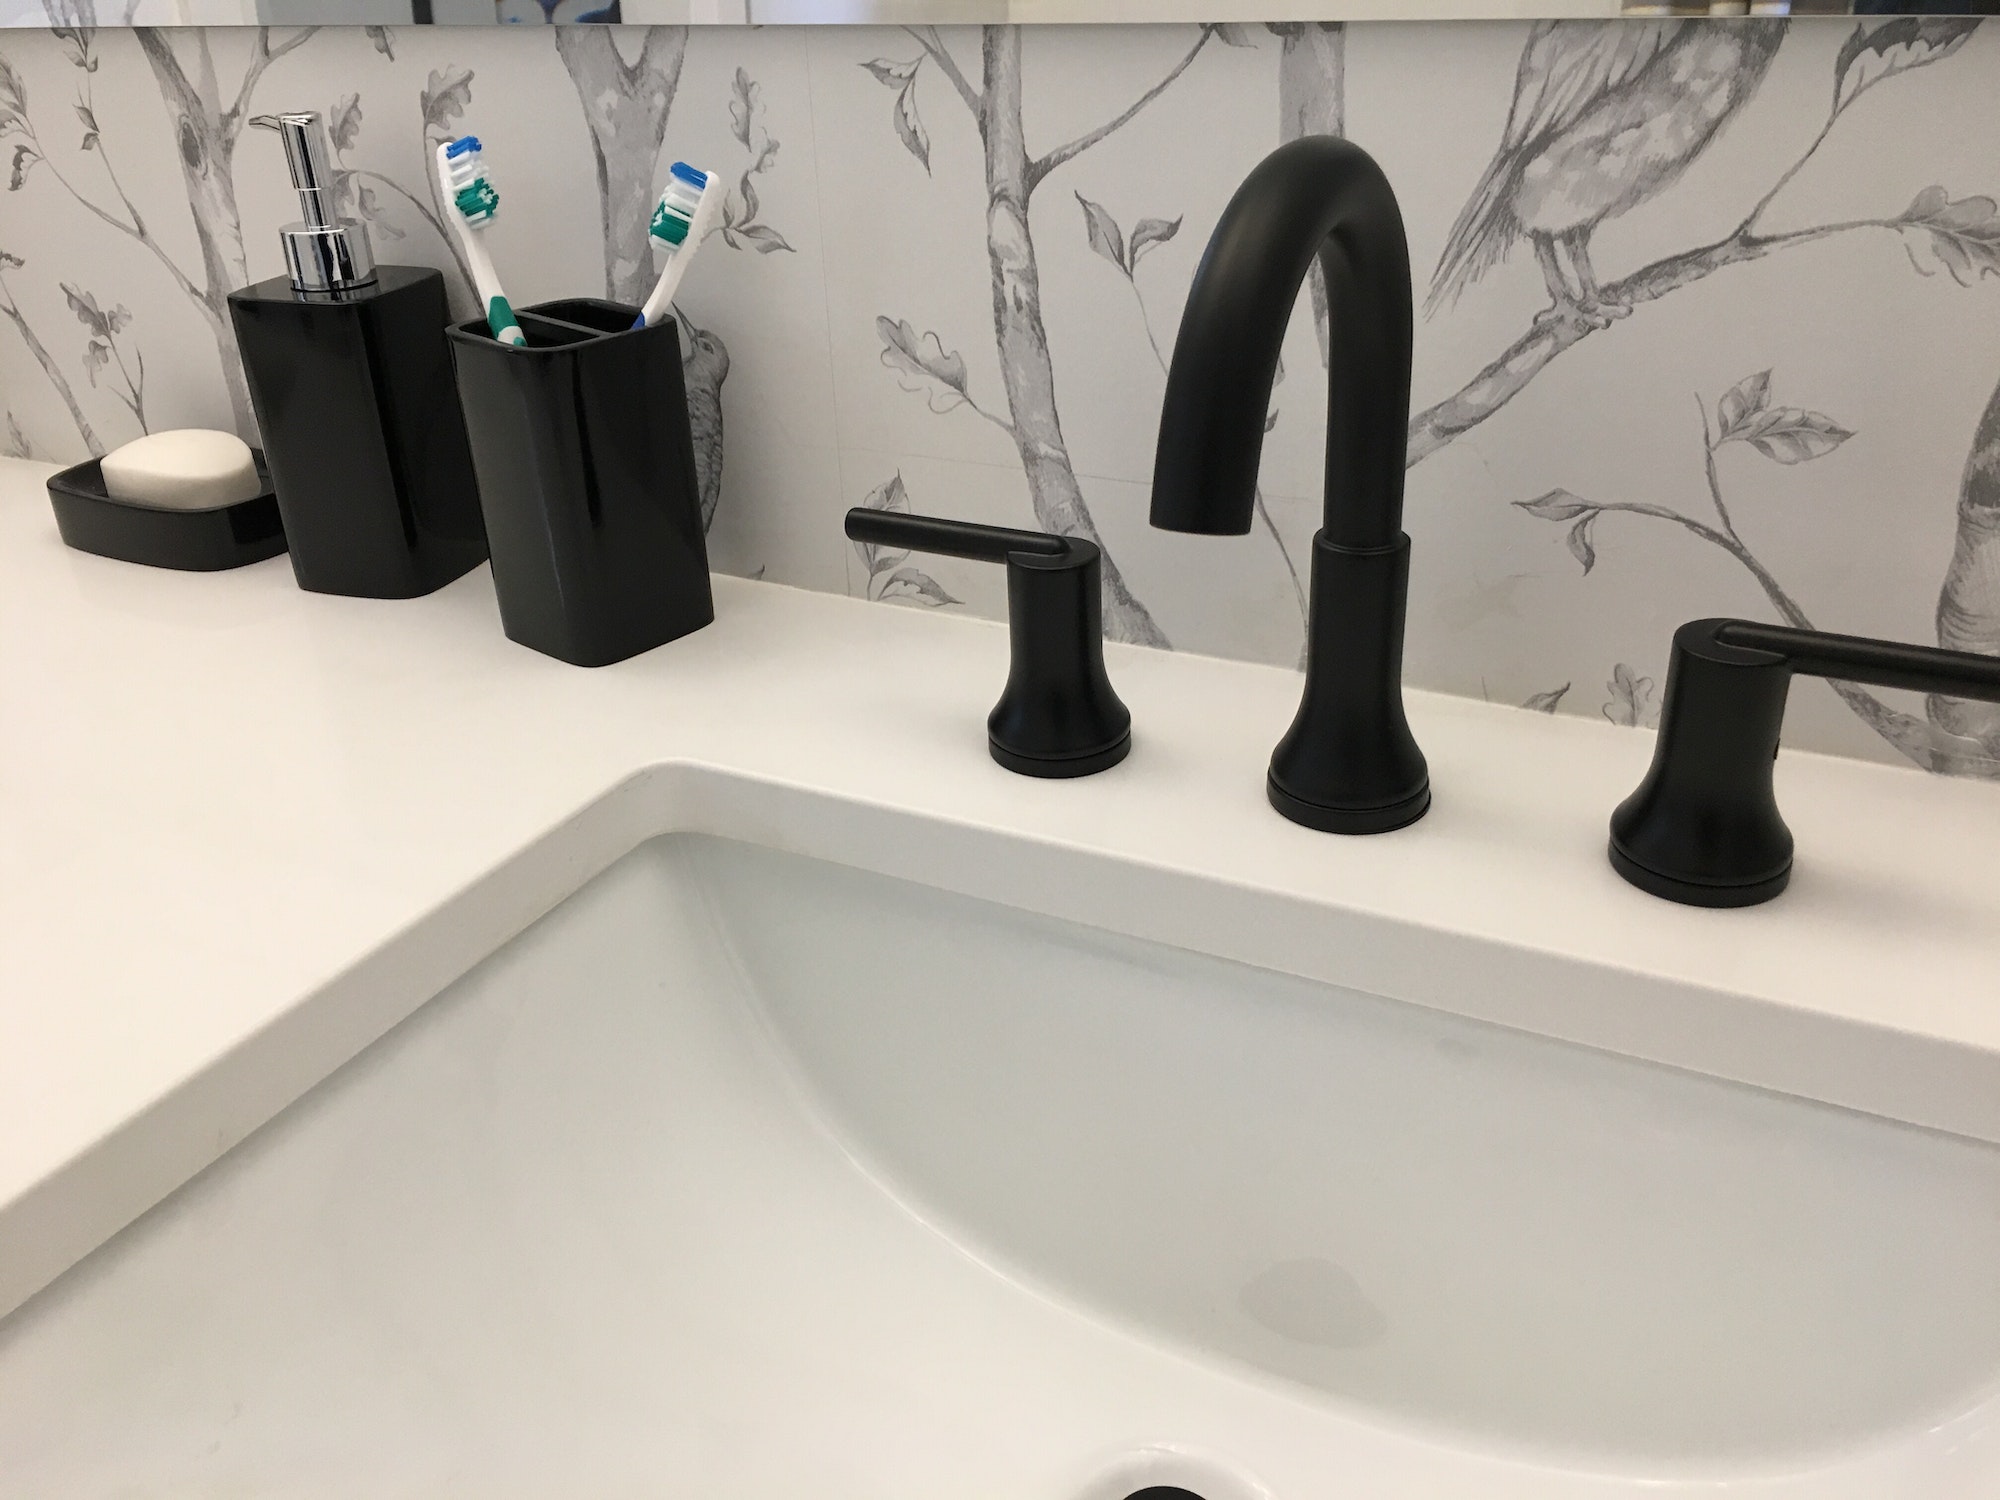 Stylish home decor in washroom using black color faucet and decorative accessories